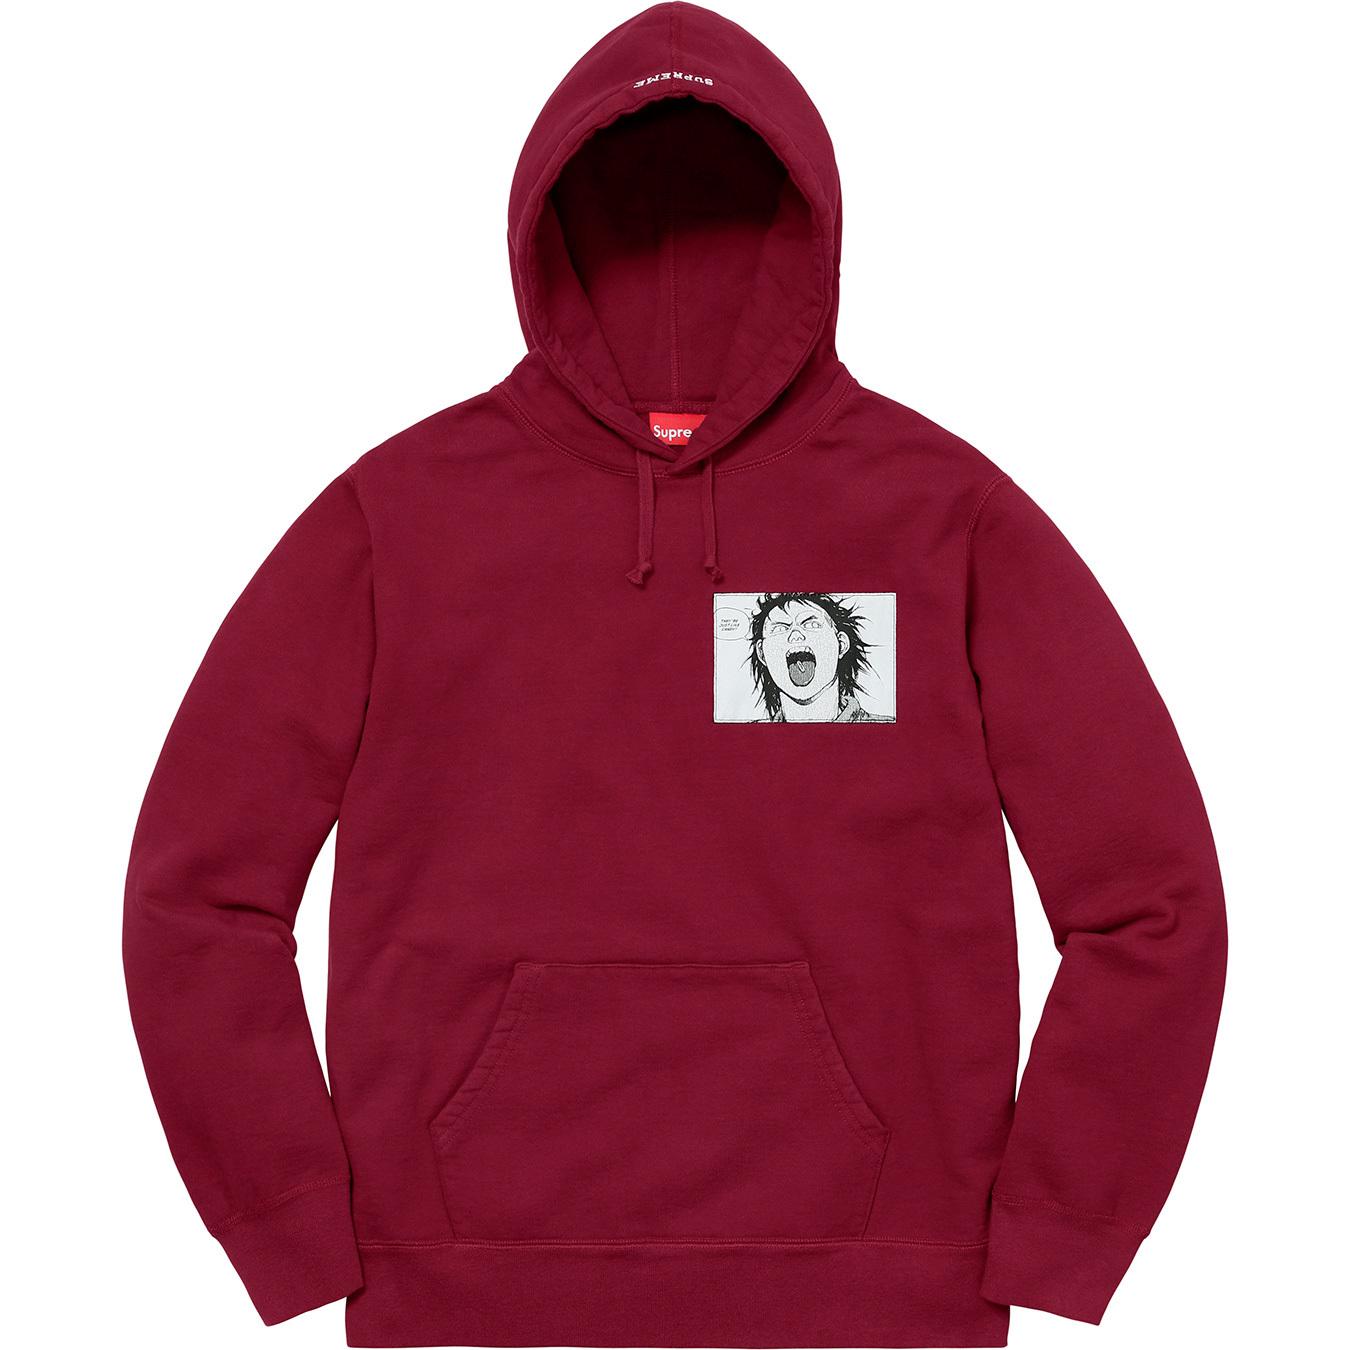 Supreme Akira Patches Hooded Sweatshirt in Red for Men - Lyst